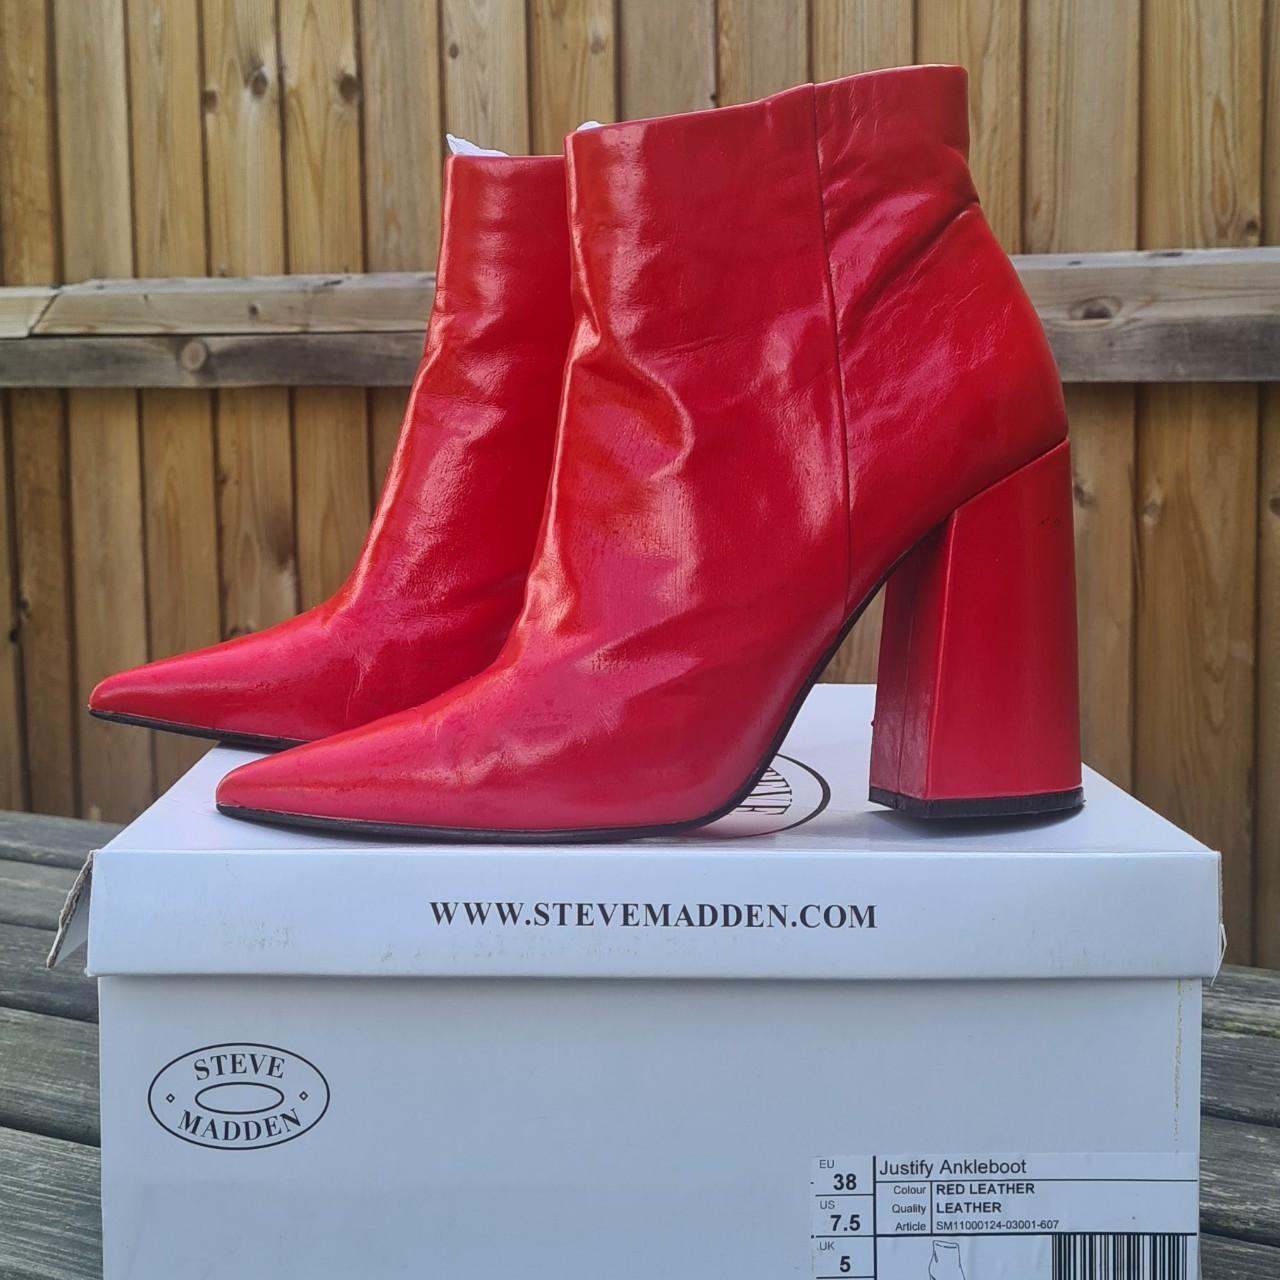 Steve Madden Red Leather Boots. Worn once. Size:... - Depop